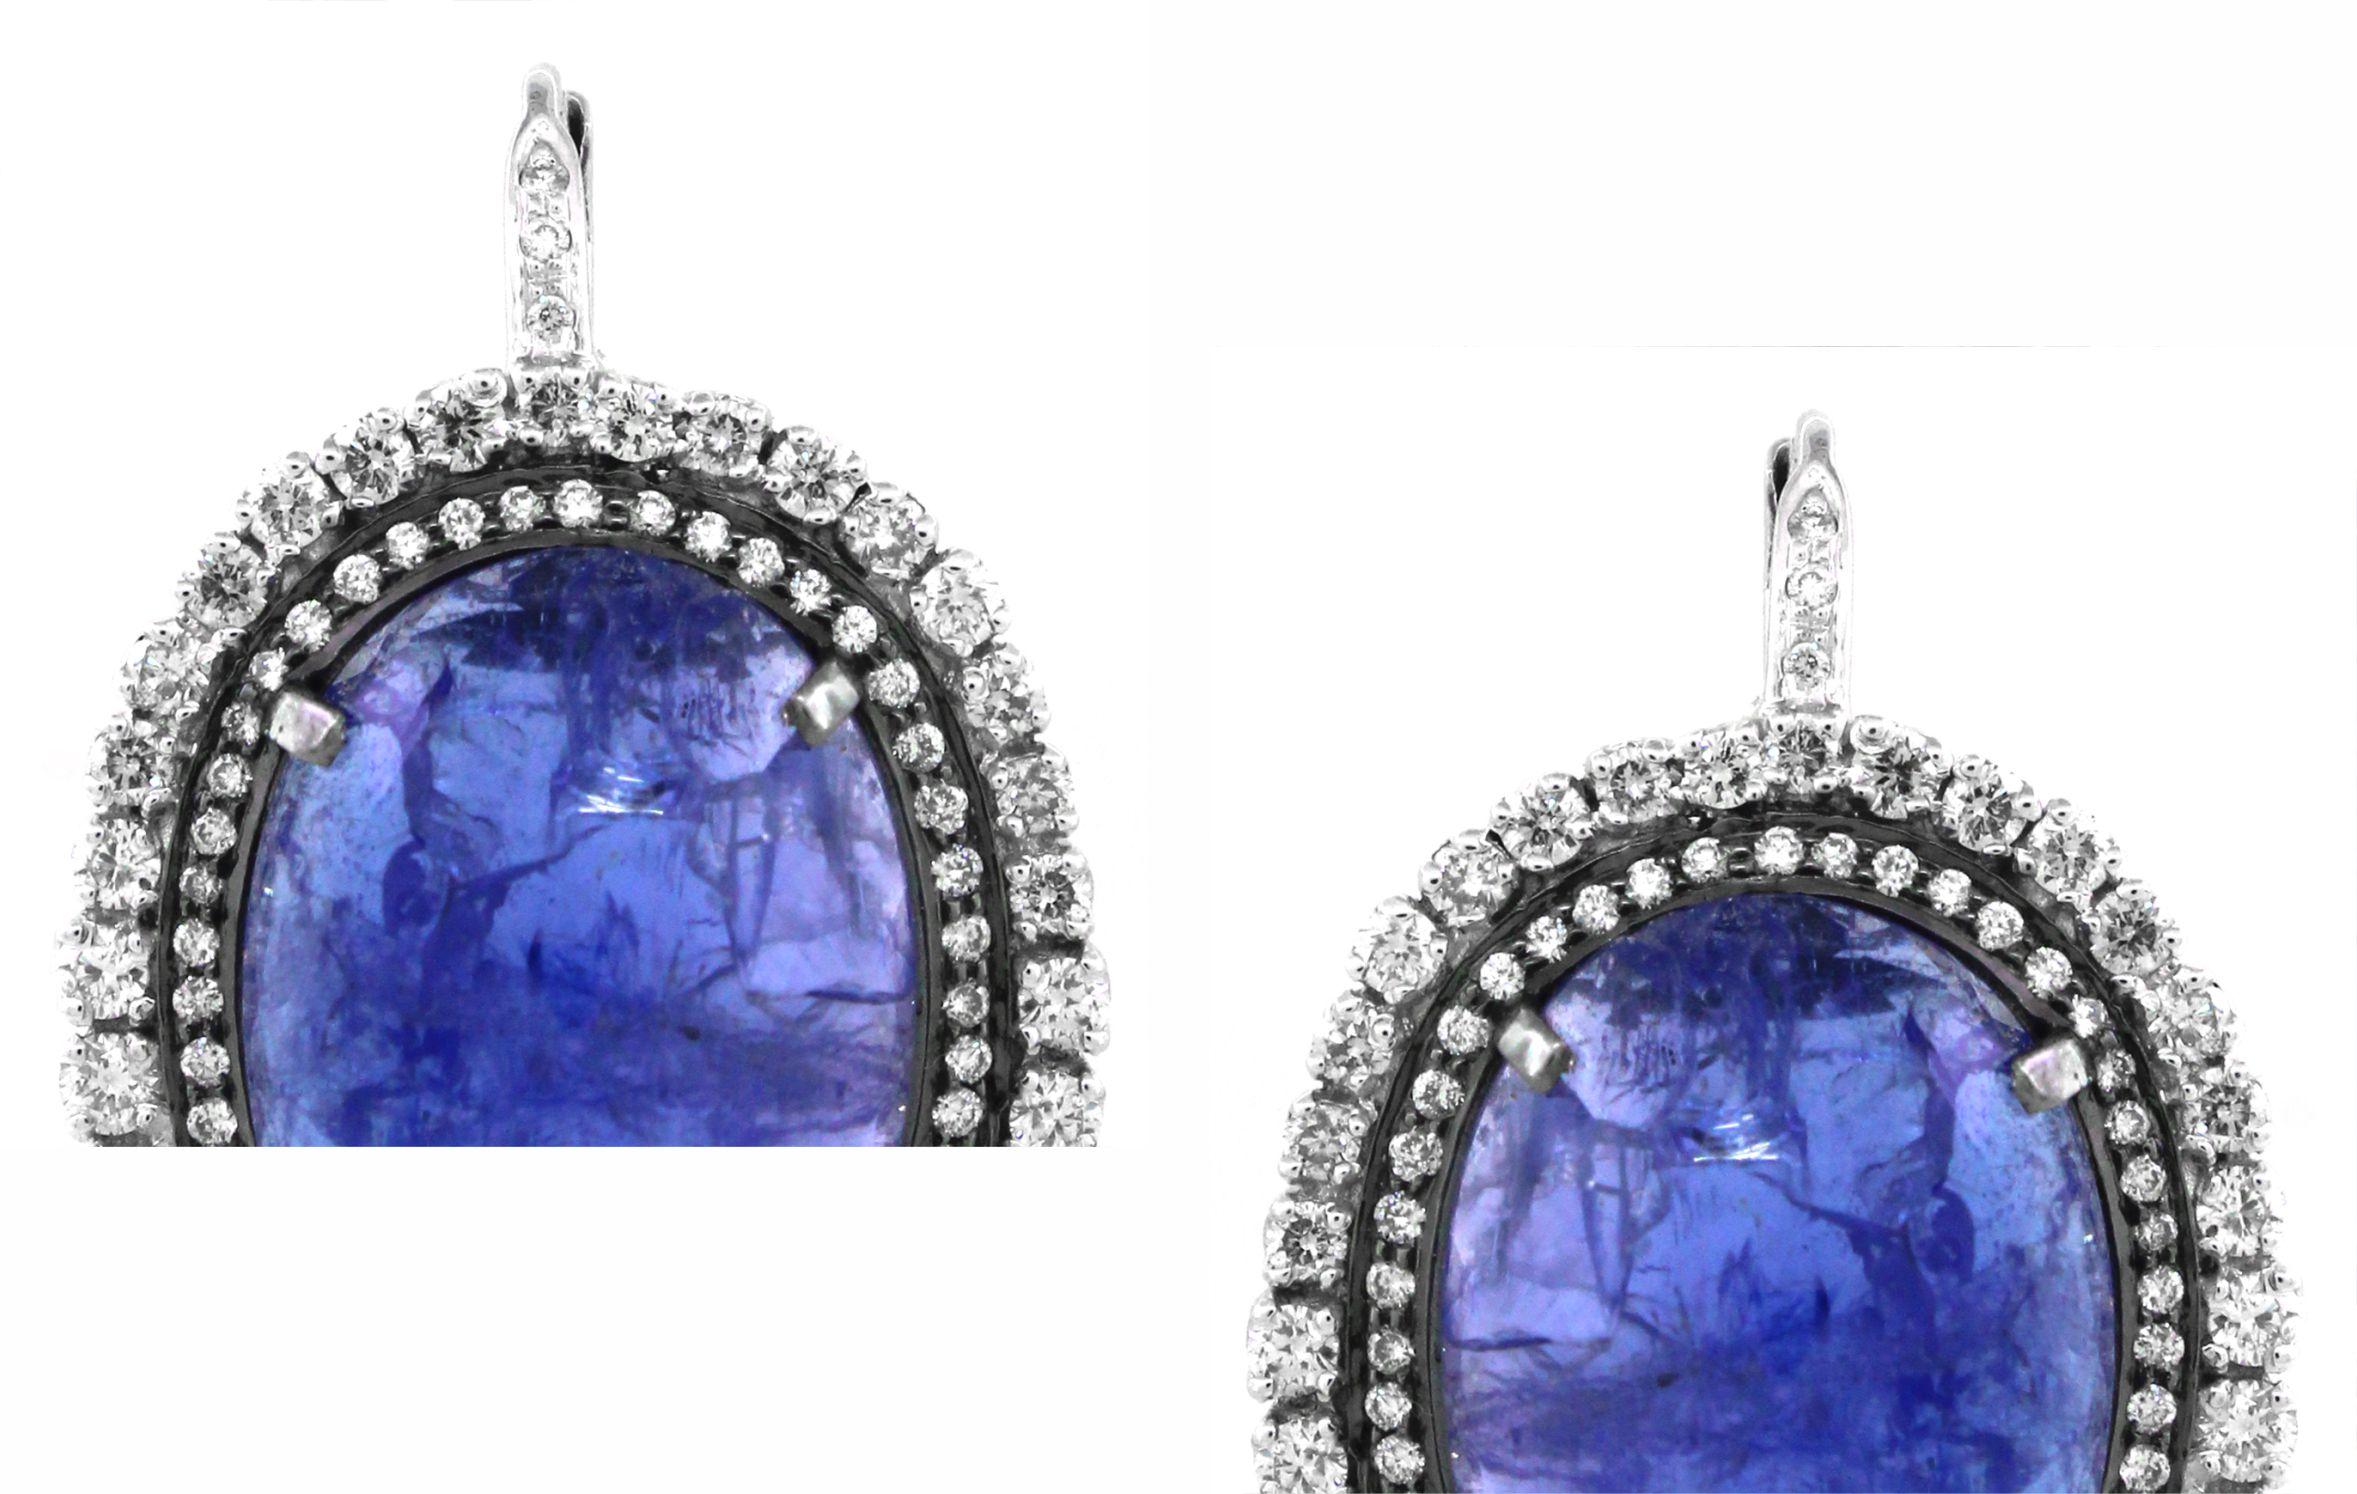 Introducing our exquisite Vintage Tanzanite Drop Earrings, meticulously crafted in luxurious 18K white gold, weighing a total of 15.09 grams. These captivating earrings feature a mesmerizing centerpiece of Tanzanite gemstones, each boasting an